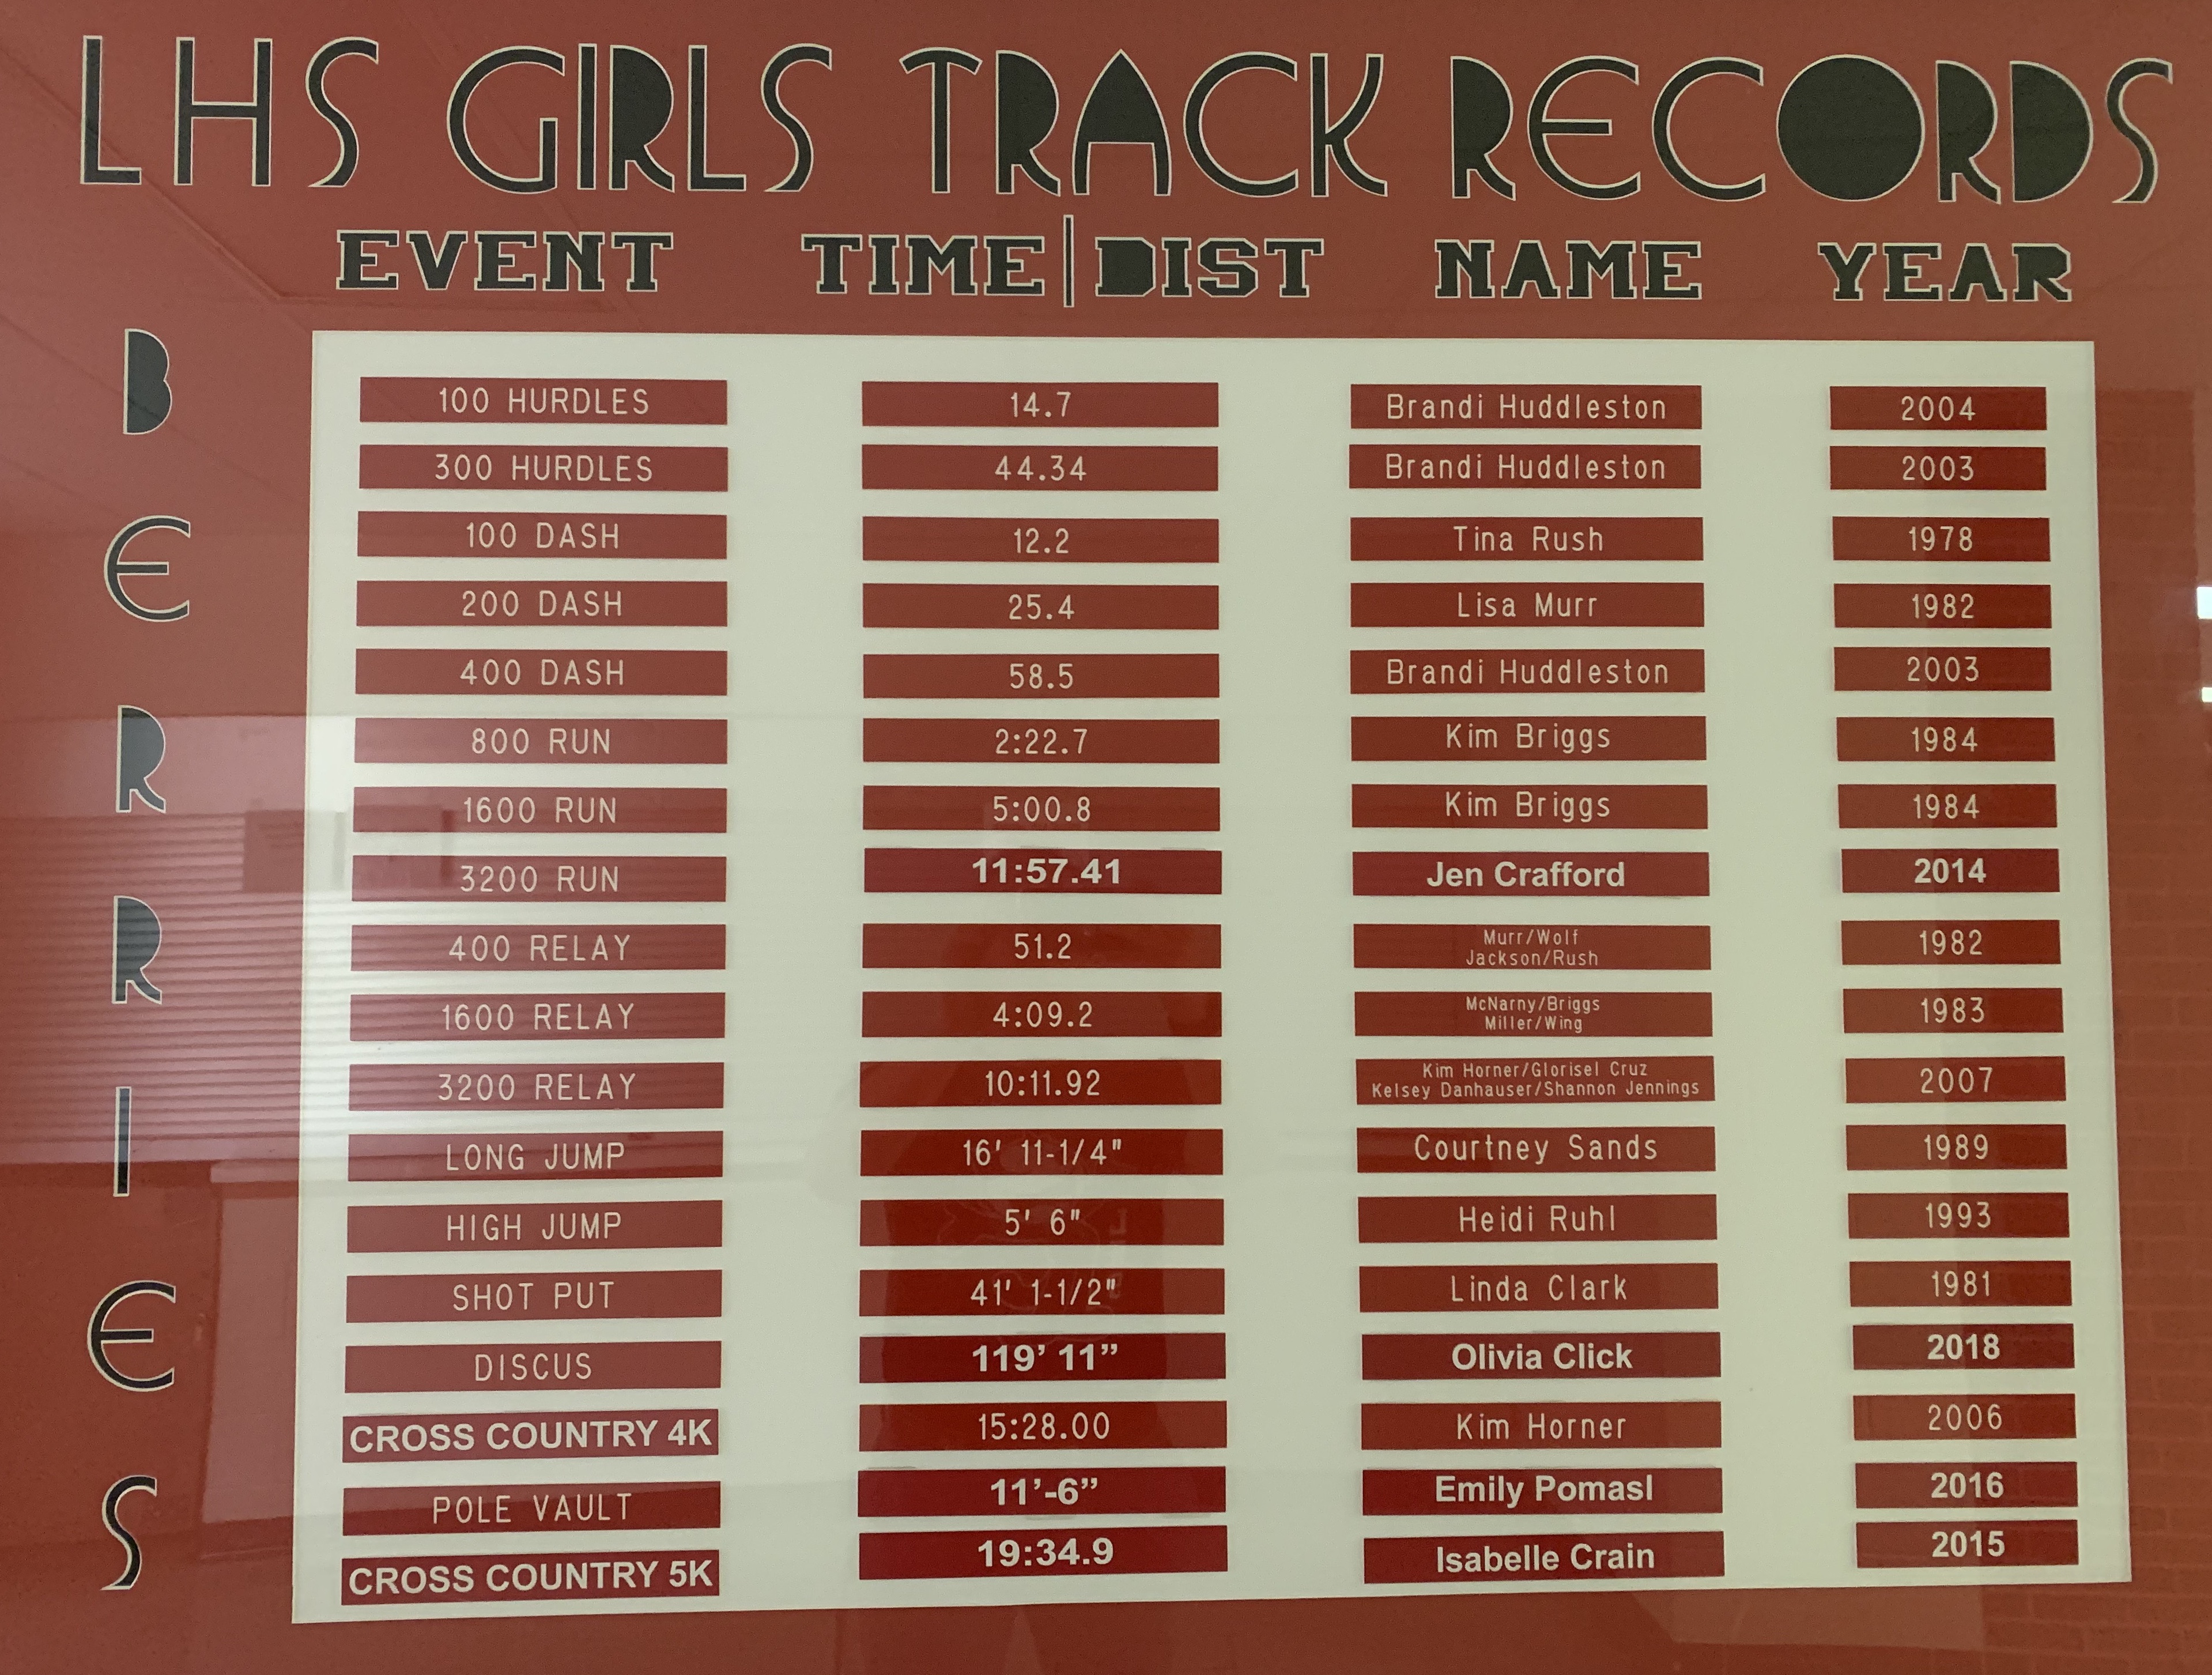 LHS Girls Track Records